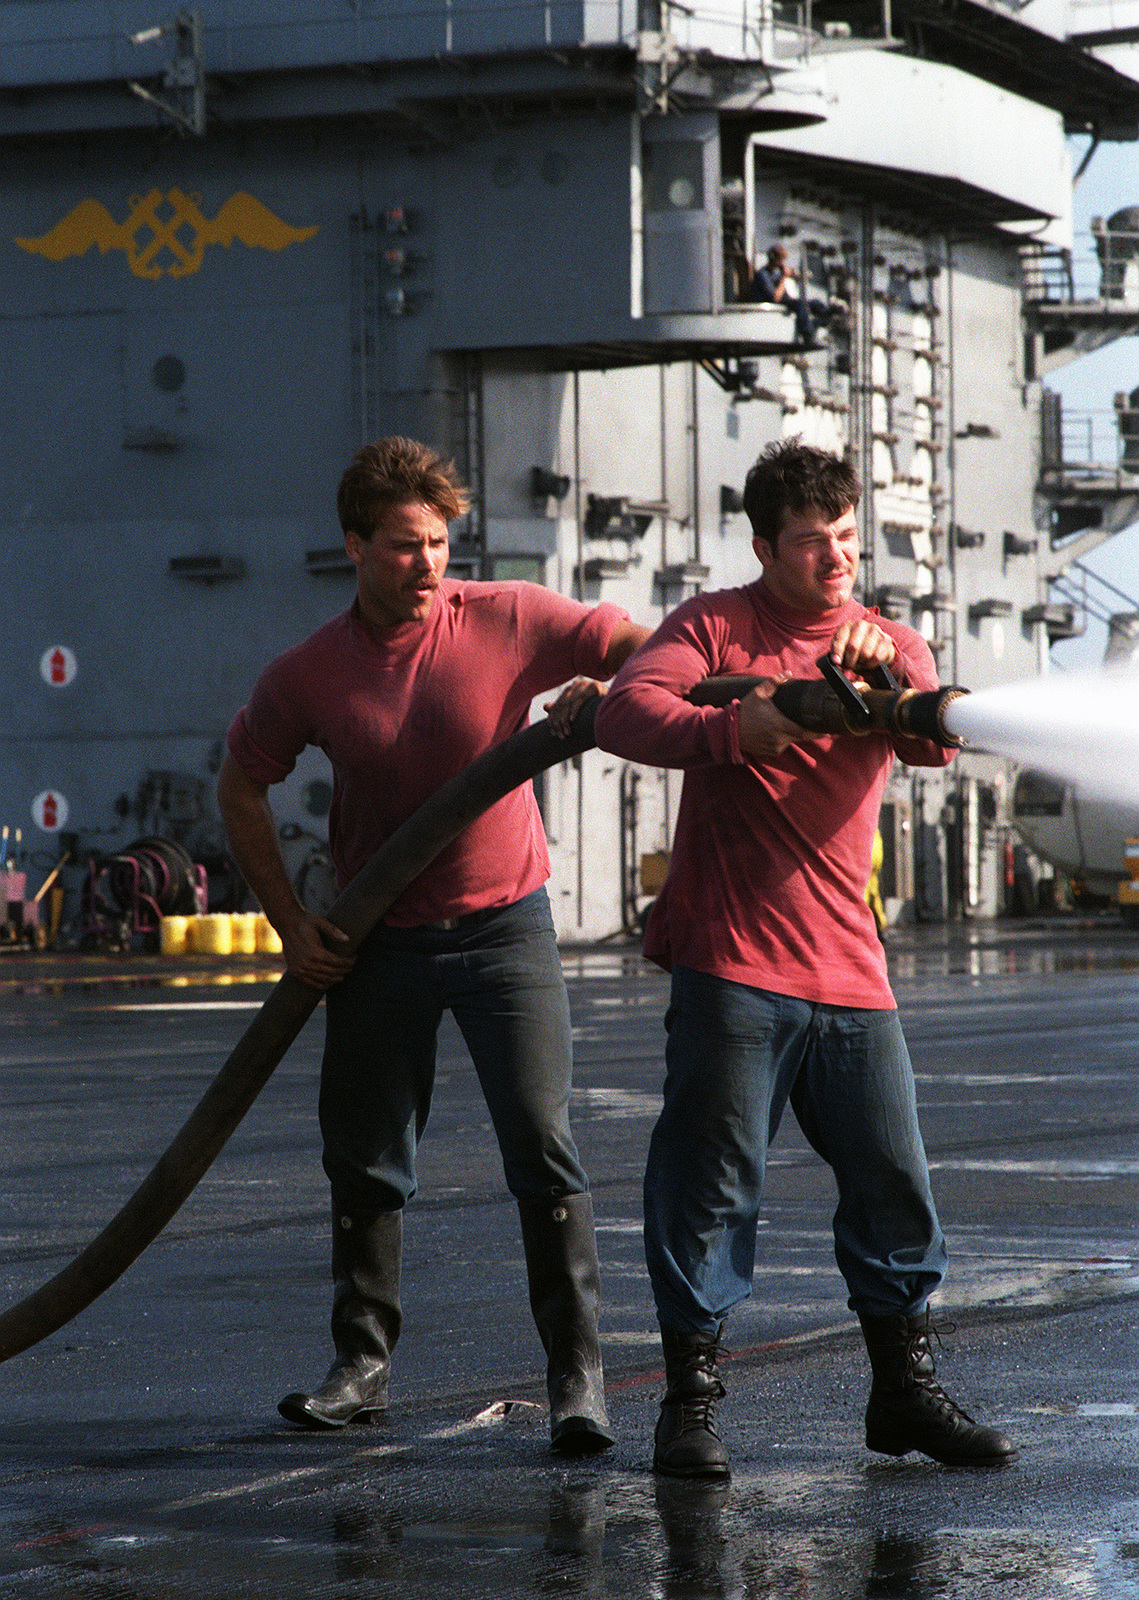 crew-members-rinse-aqueous-film-forming-foam-afff-from-the-deck-of